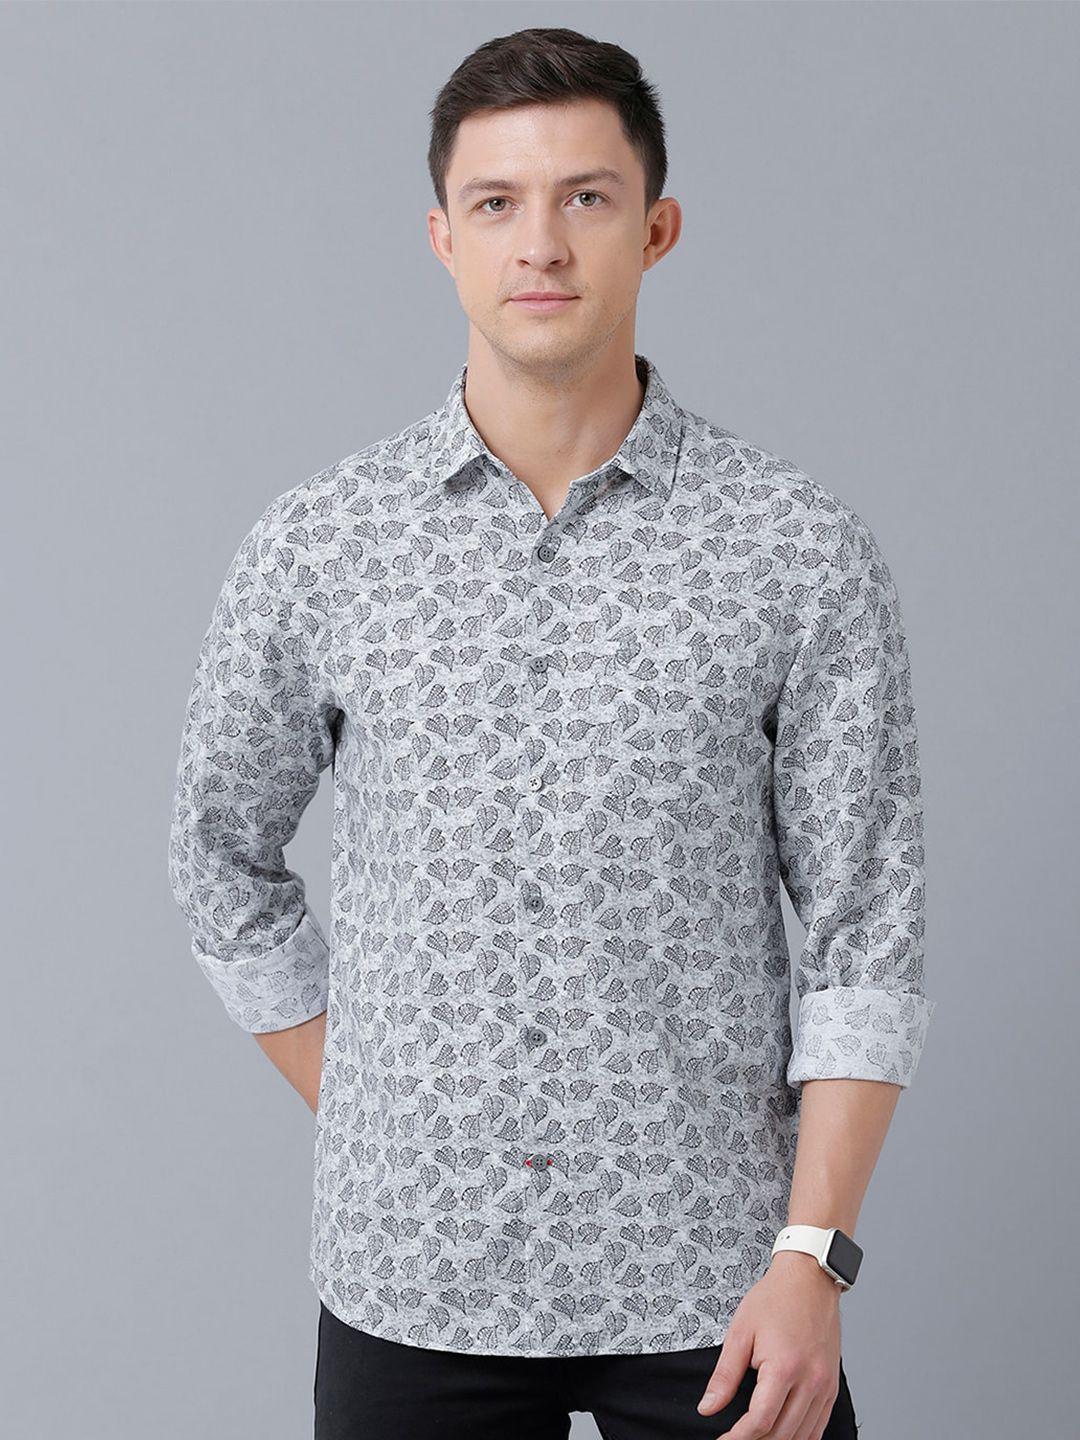 linen-club-men-floral-printed-sustainable-casual-shirt